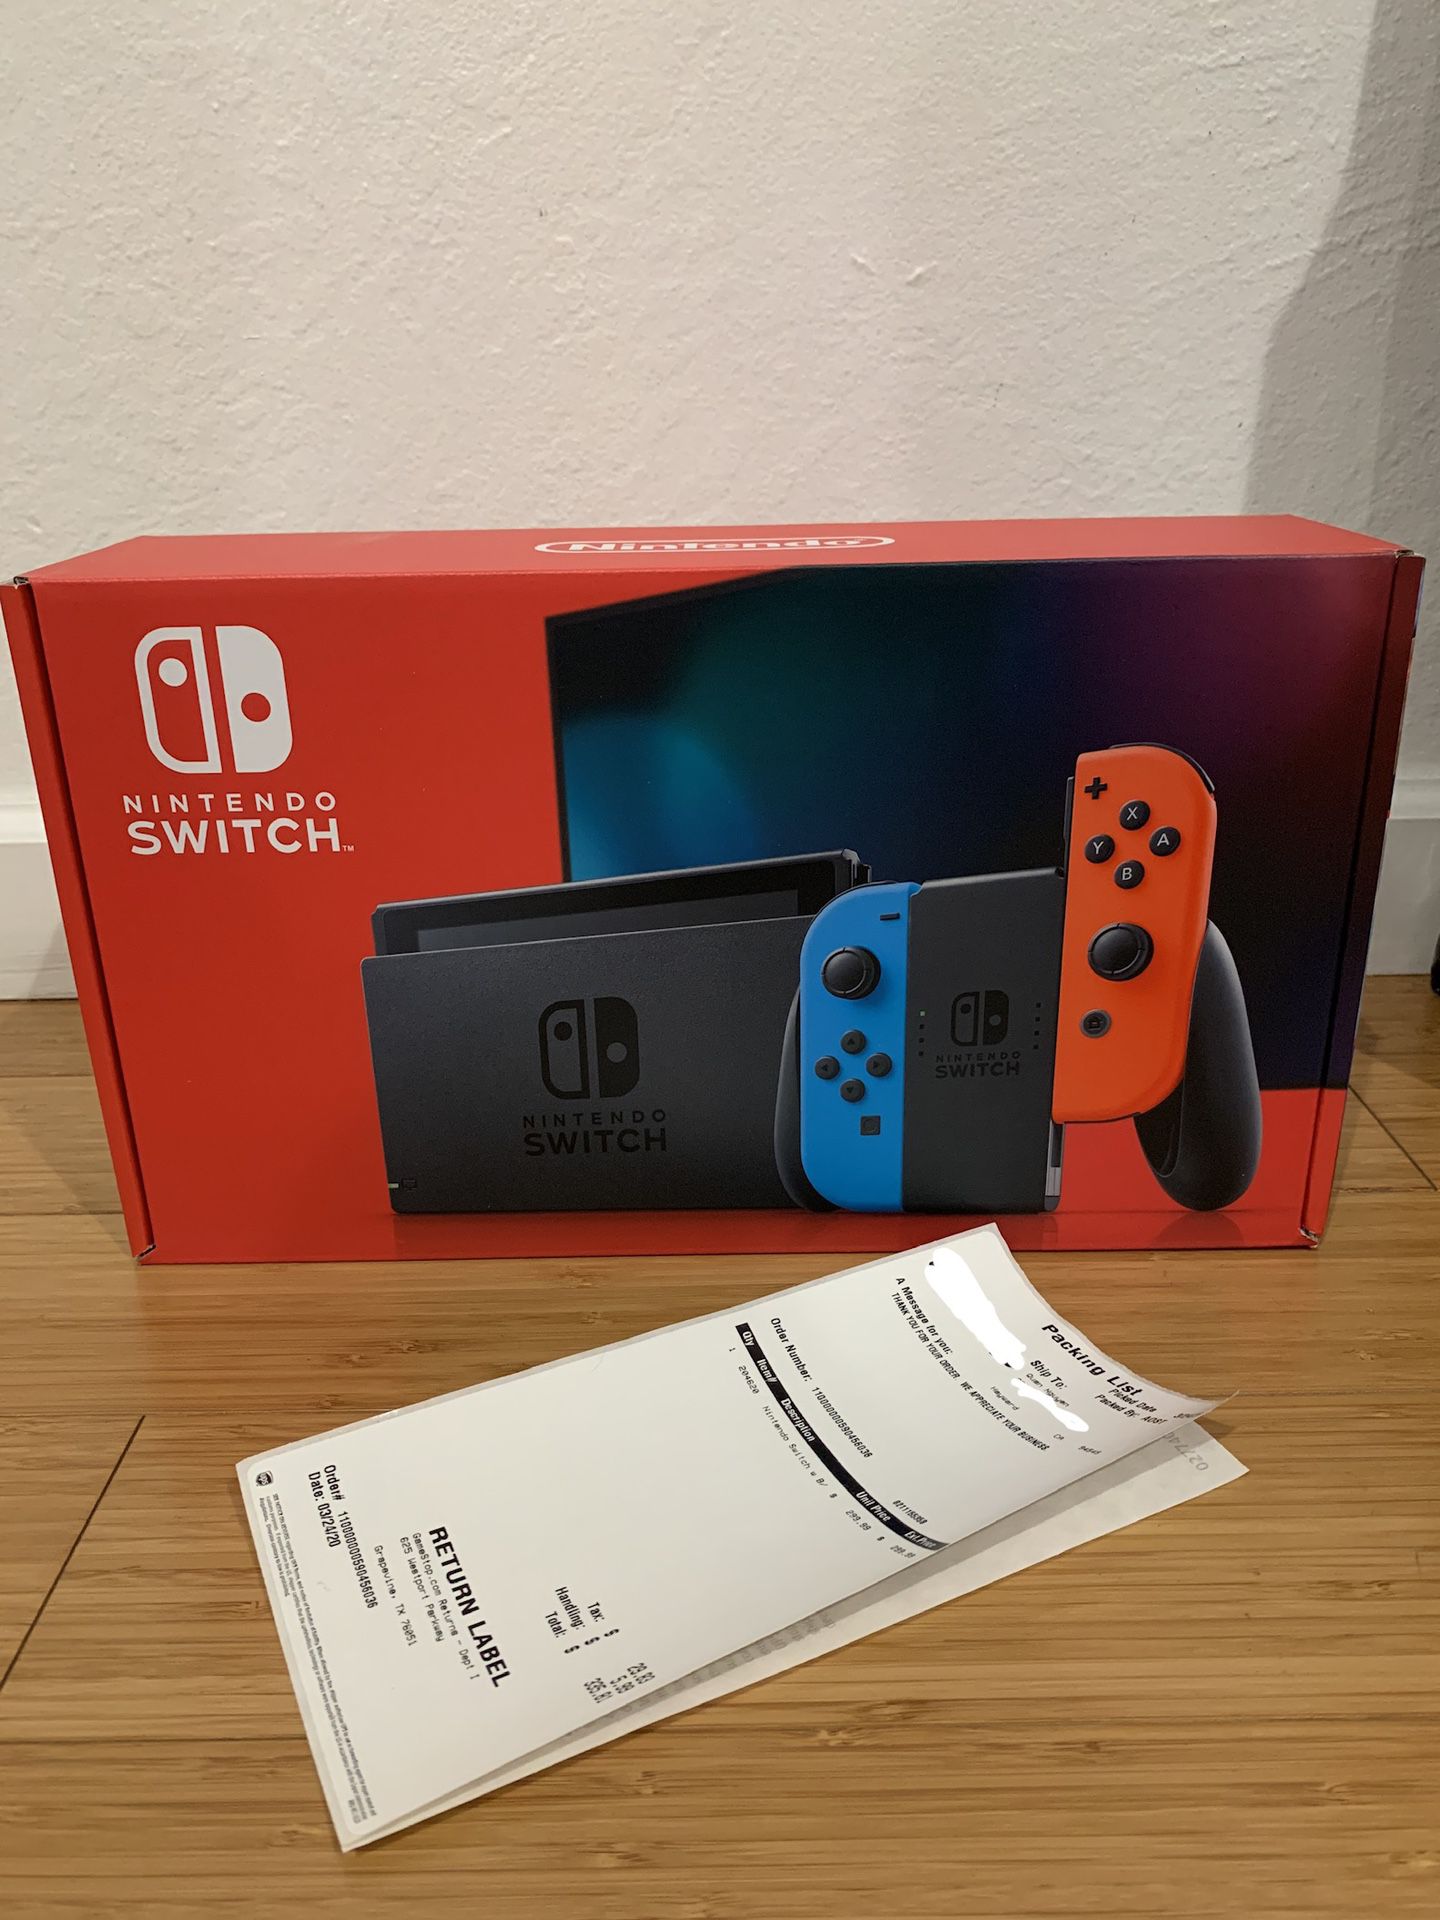 Nintendo Switch V2 (NEWEST VERSION) BRAND NEW IN BOX FROM TARGET